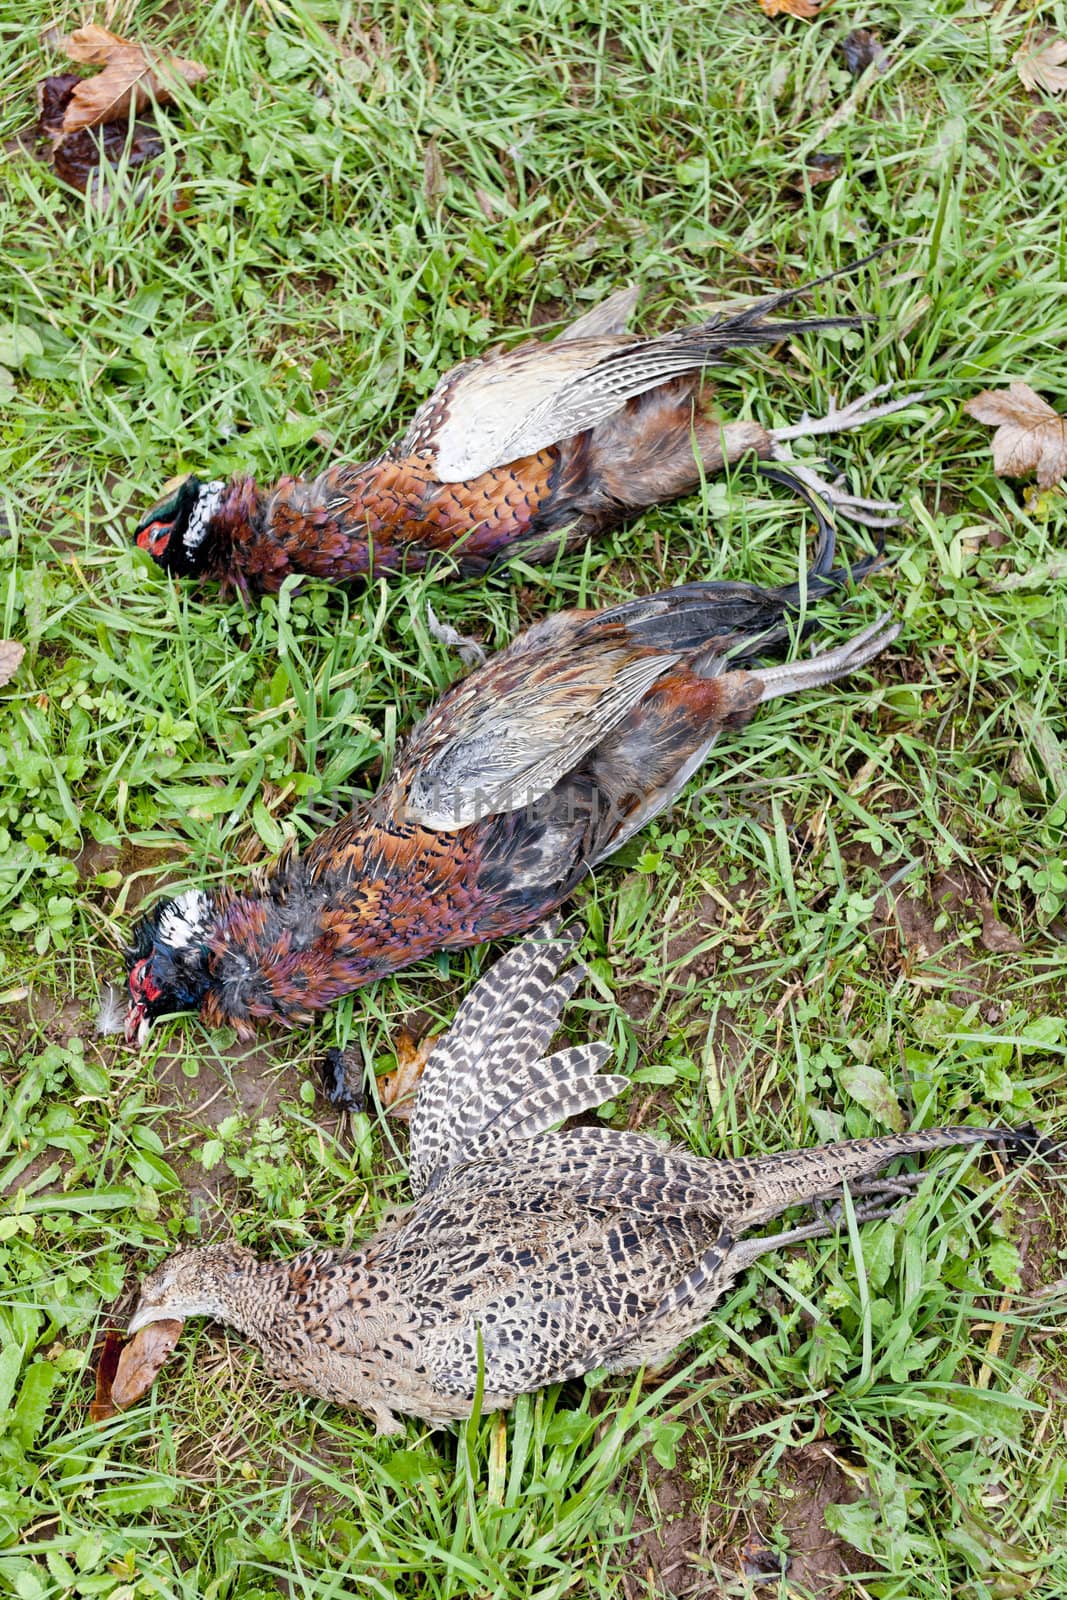 excludes of caught pheasants